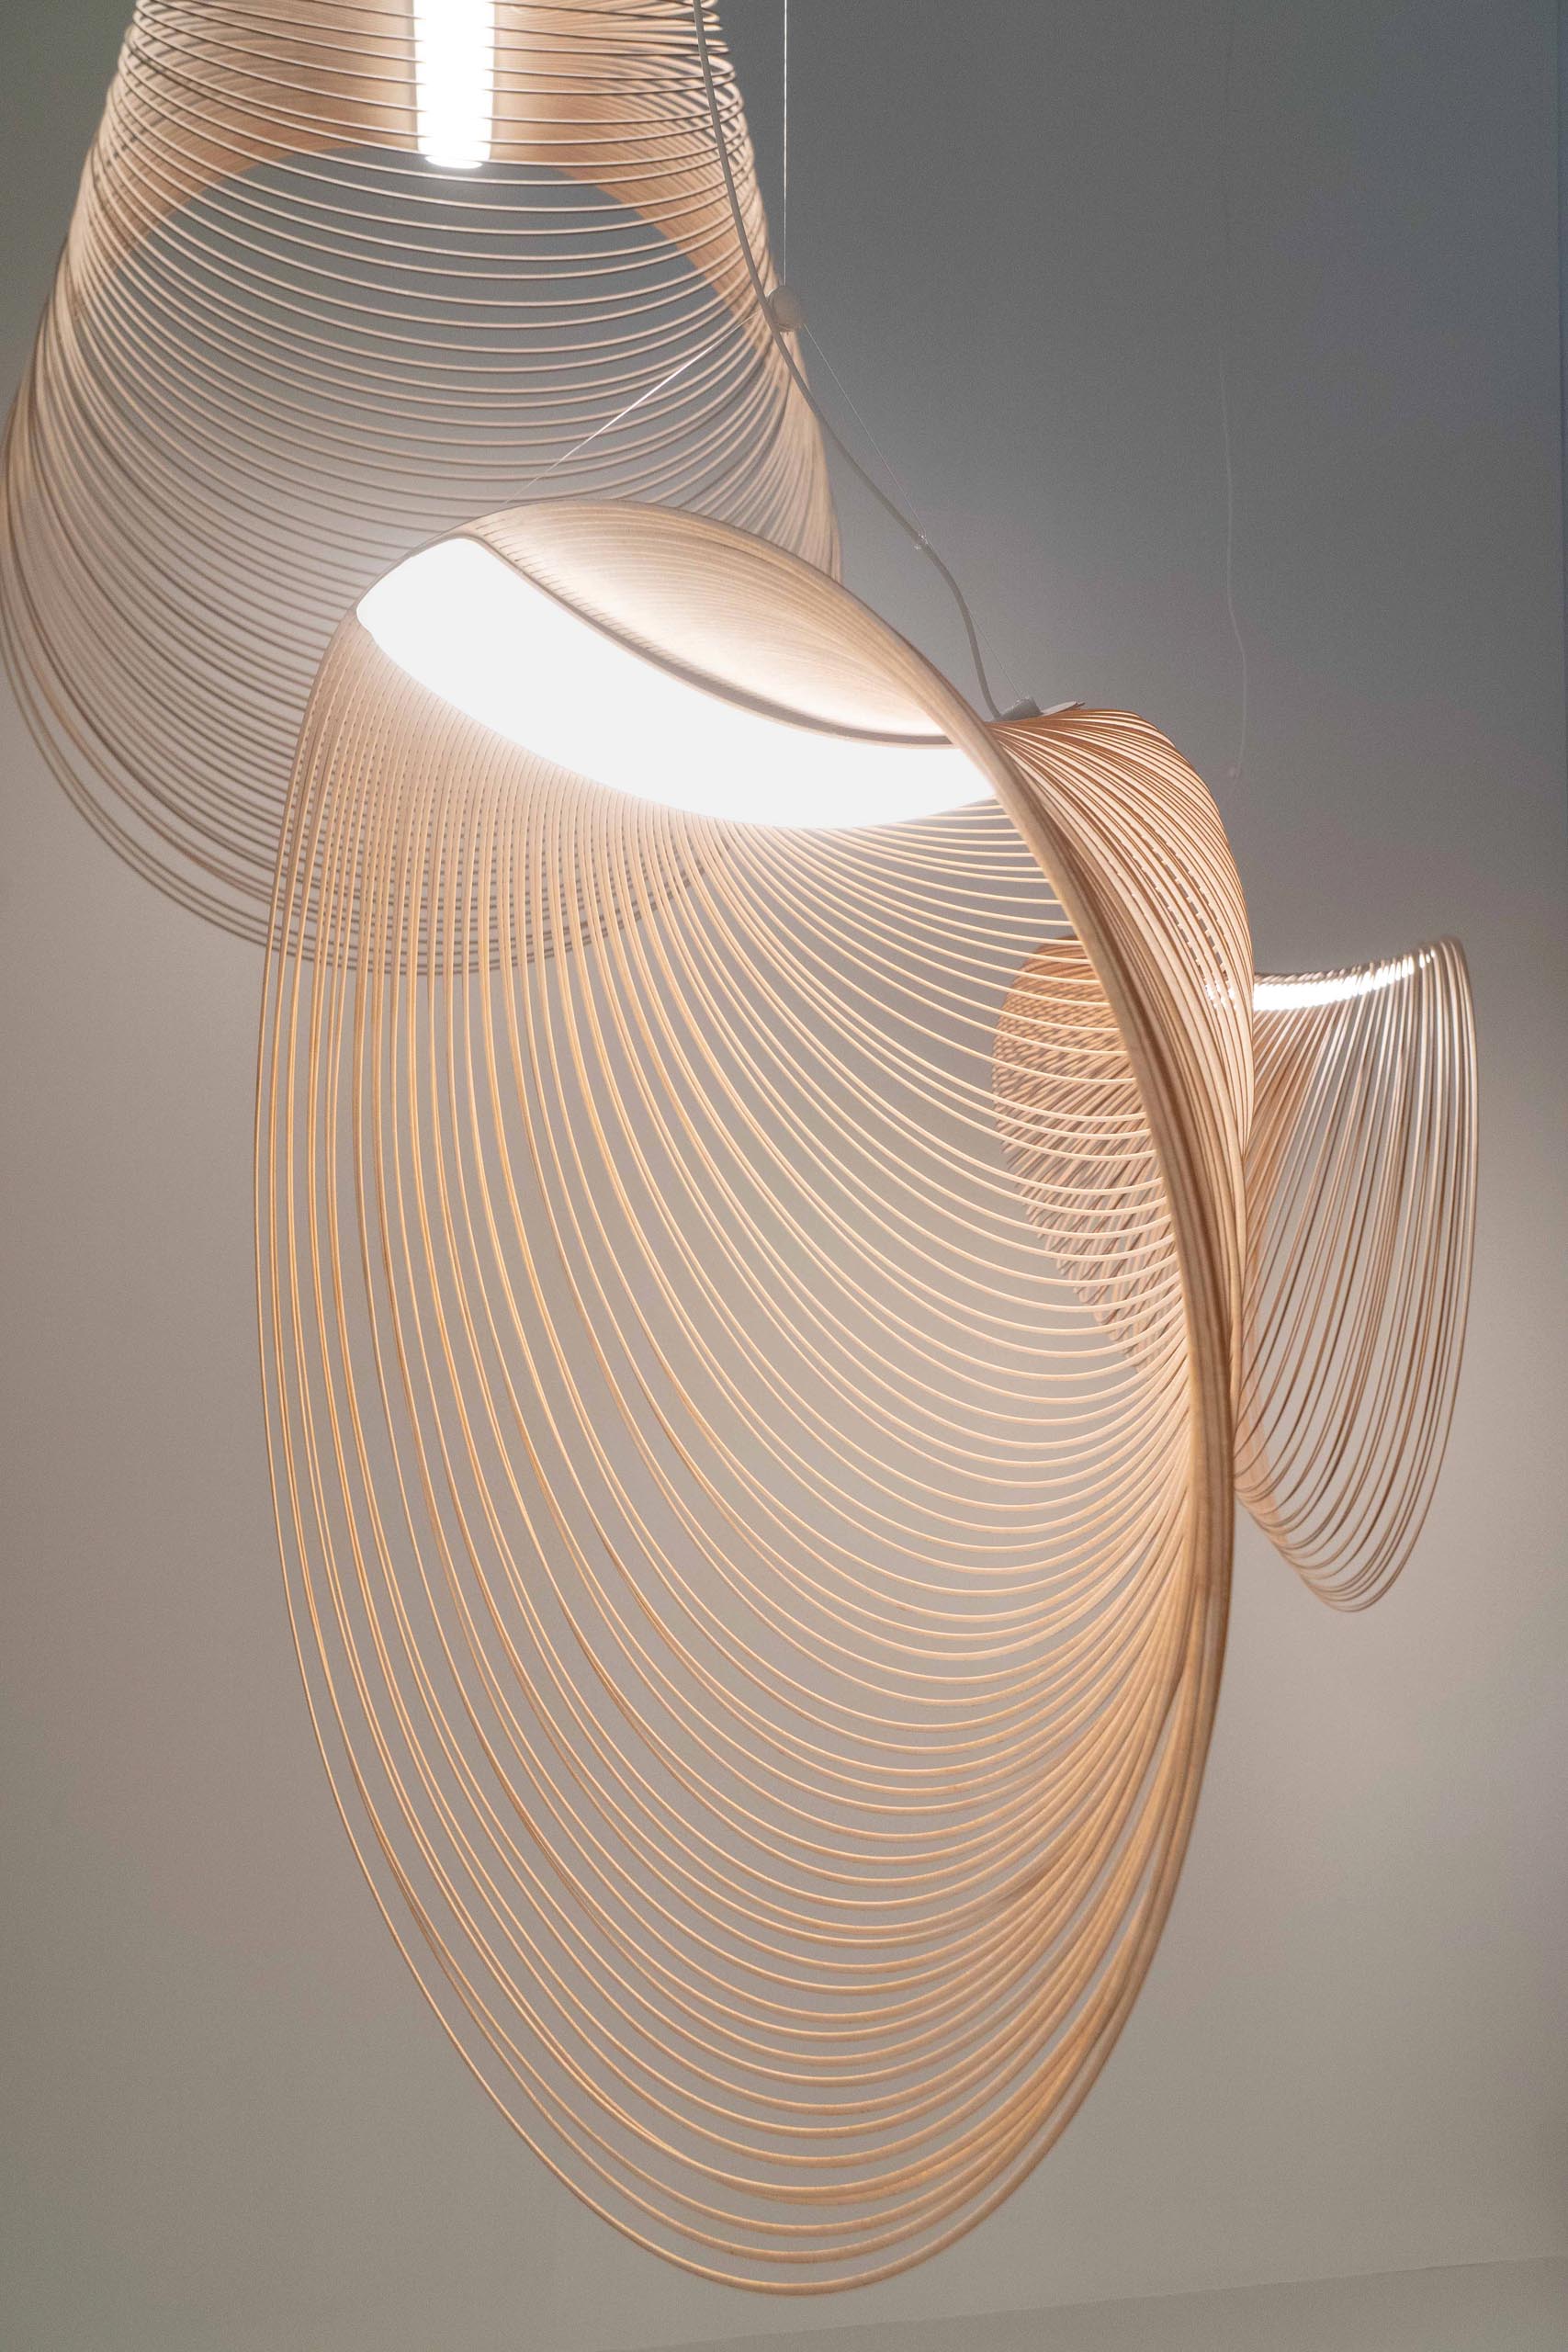 A sculptural pendant light made from laser cut wood and LEDs.